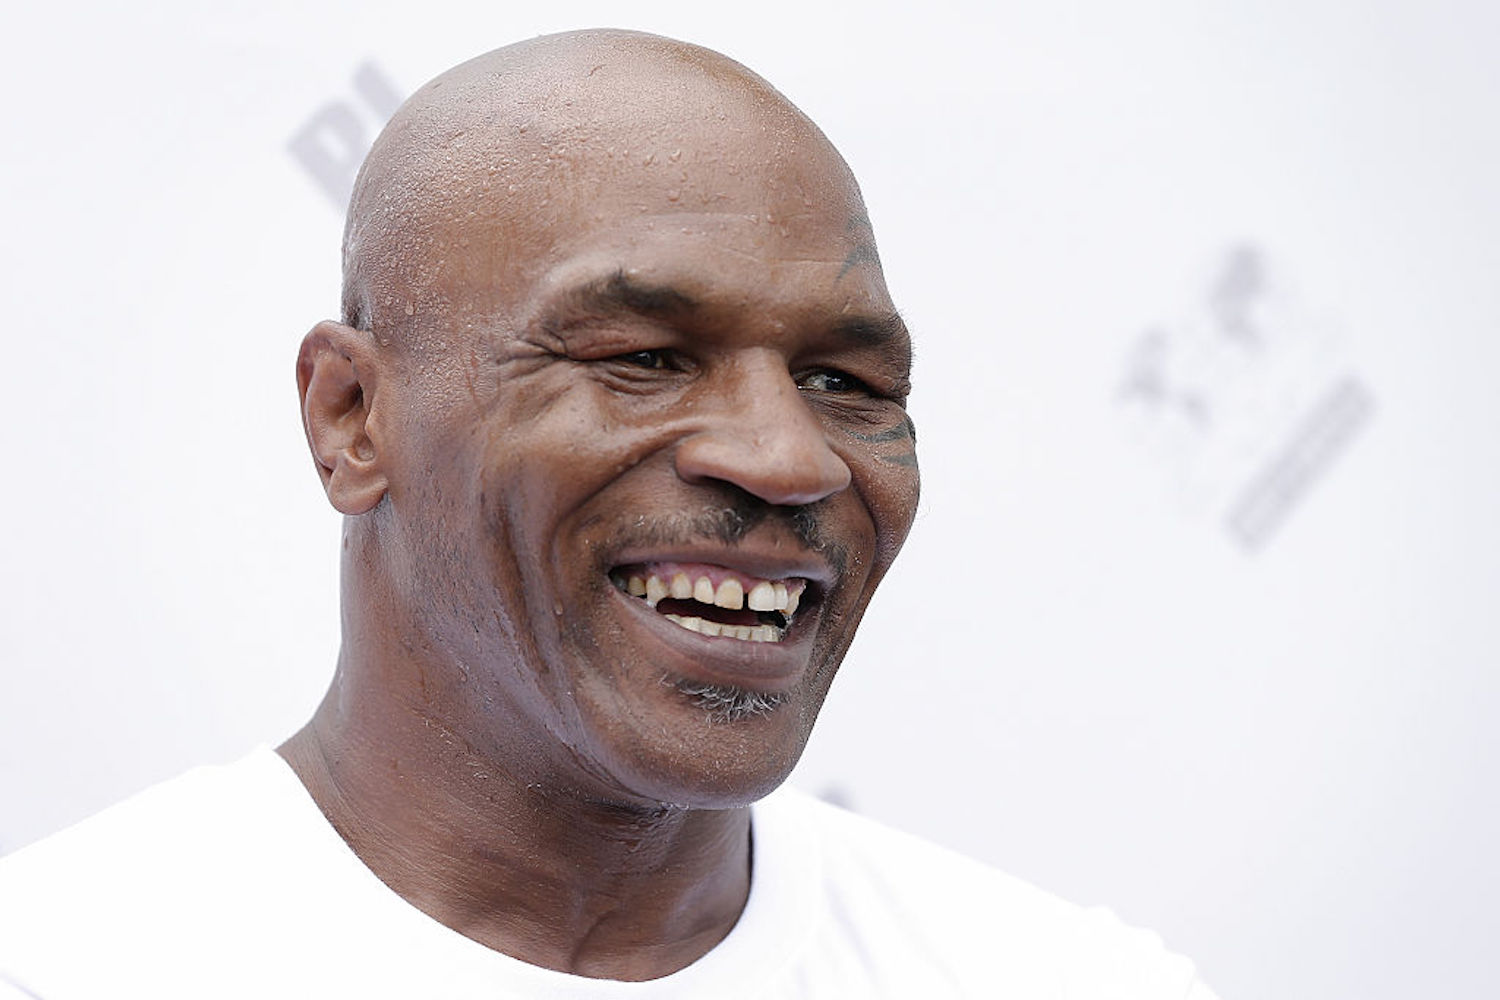 Mike Tyson has been training ferociously to return to the ring, and he just made the announcement boxing fans have been waiting for.